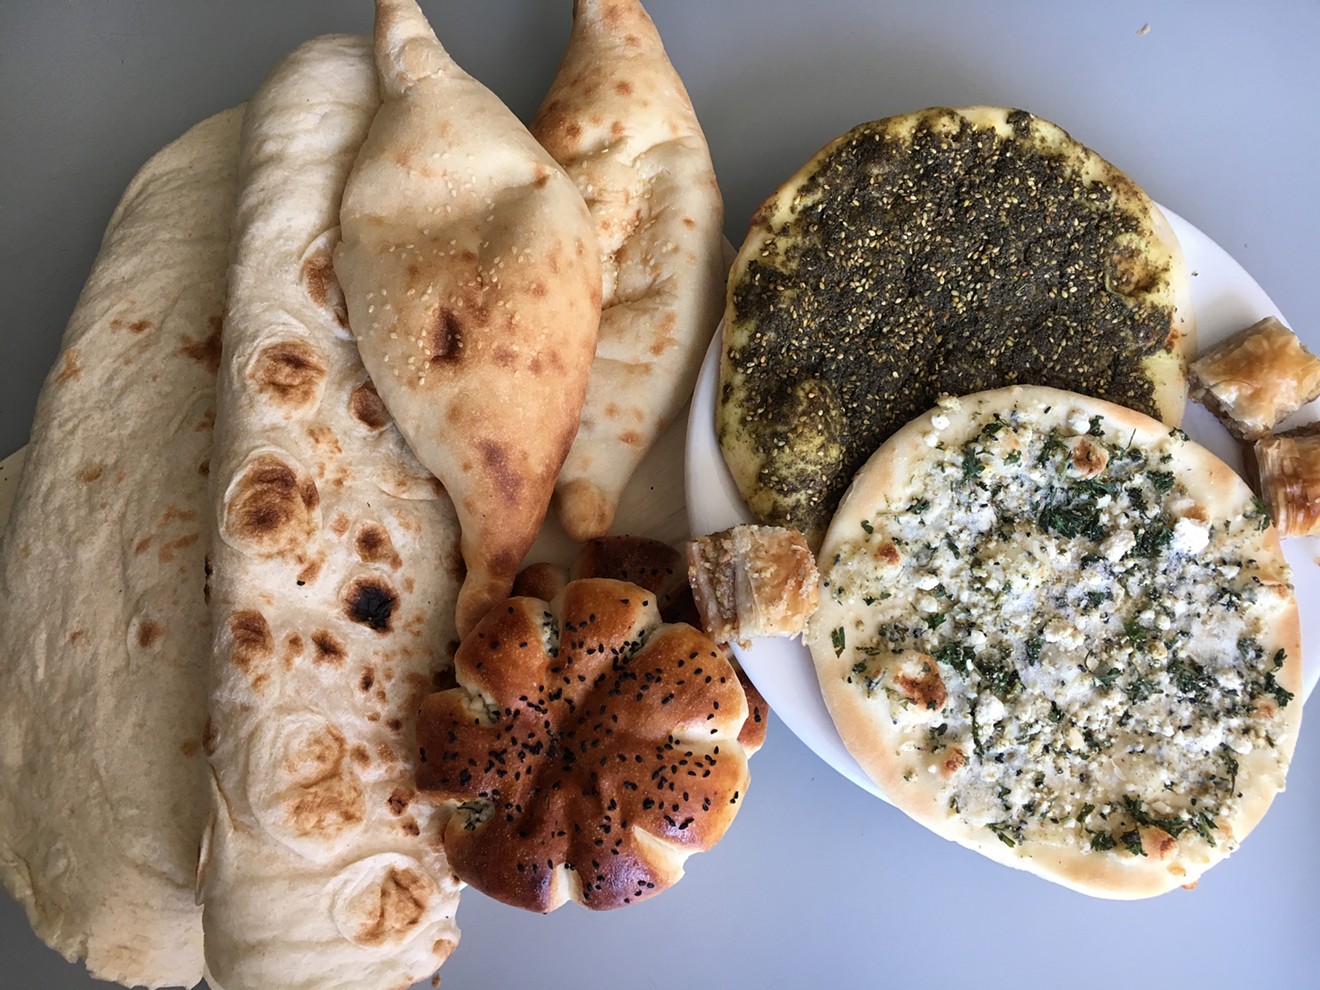 Flatbread, samoon, cheese-filled buns, baklava and pizza-like rounds called manakish are just a few of the baked goods available at Shahrazad.